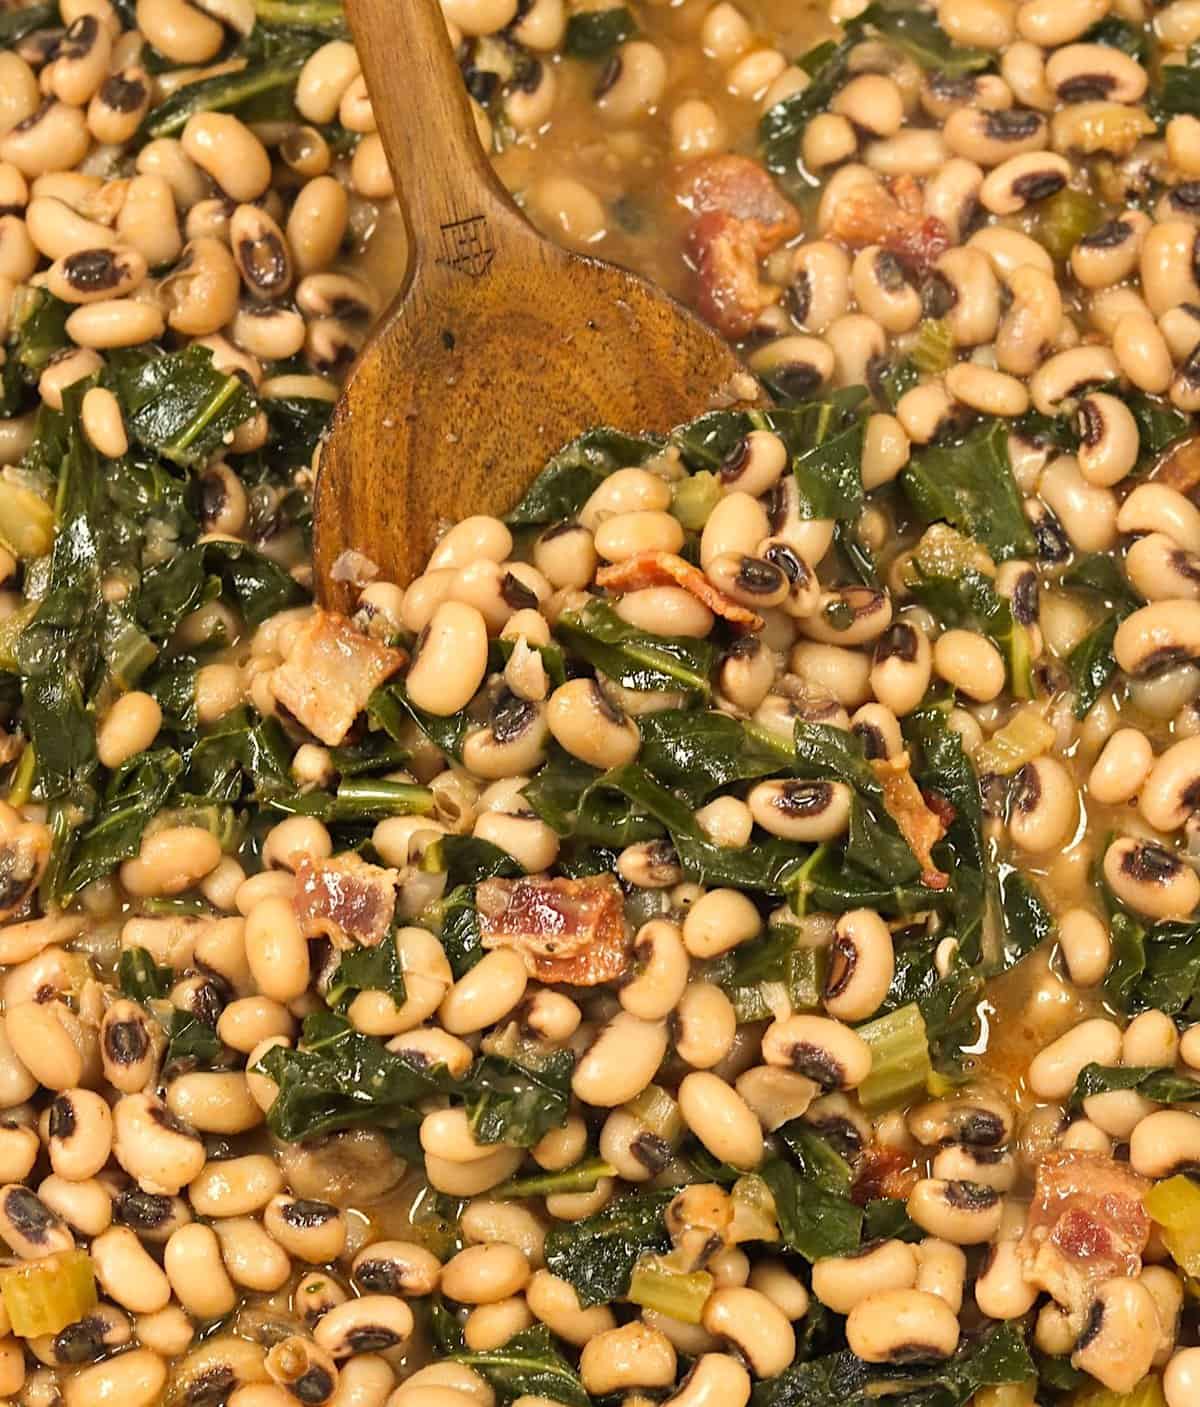 Finished Black-Eyed Peas and Collard Greens ready to enjoy